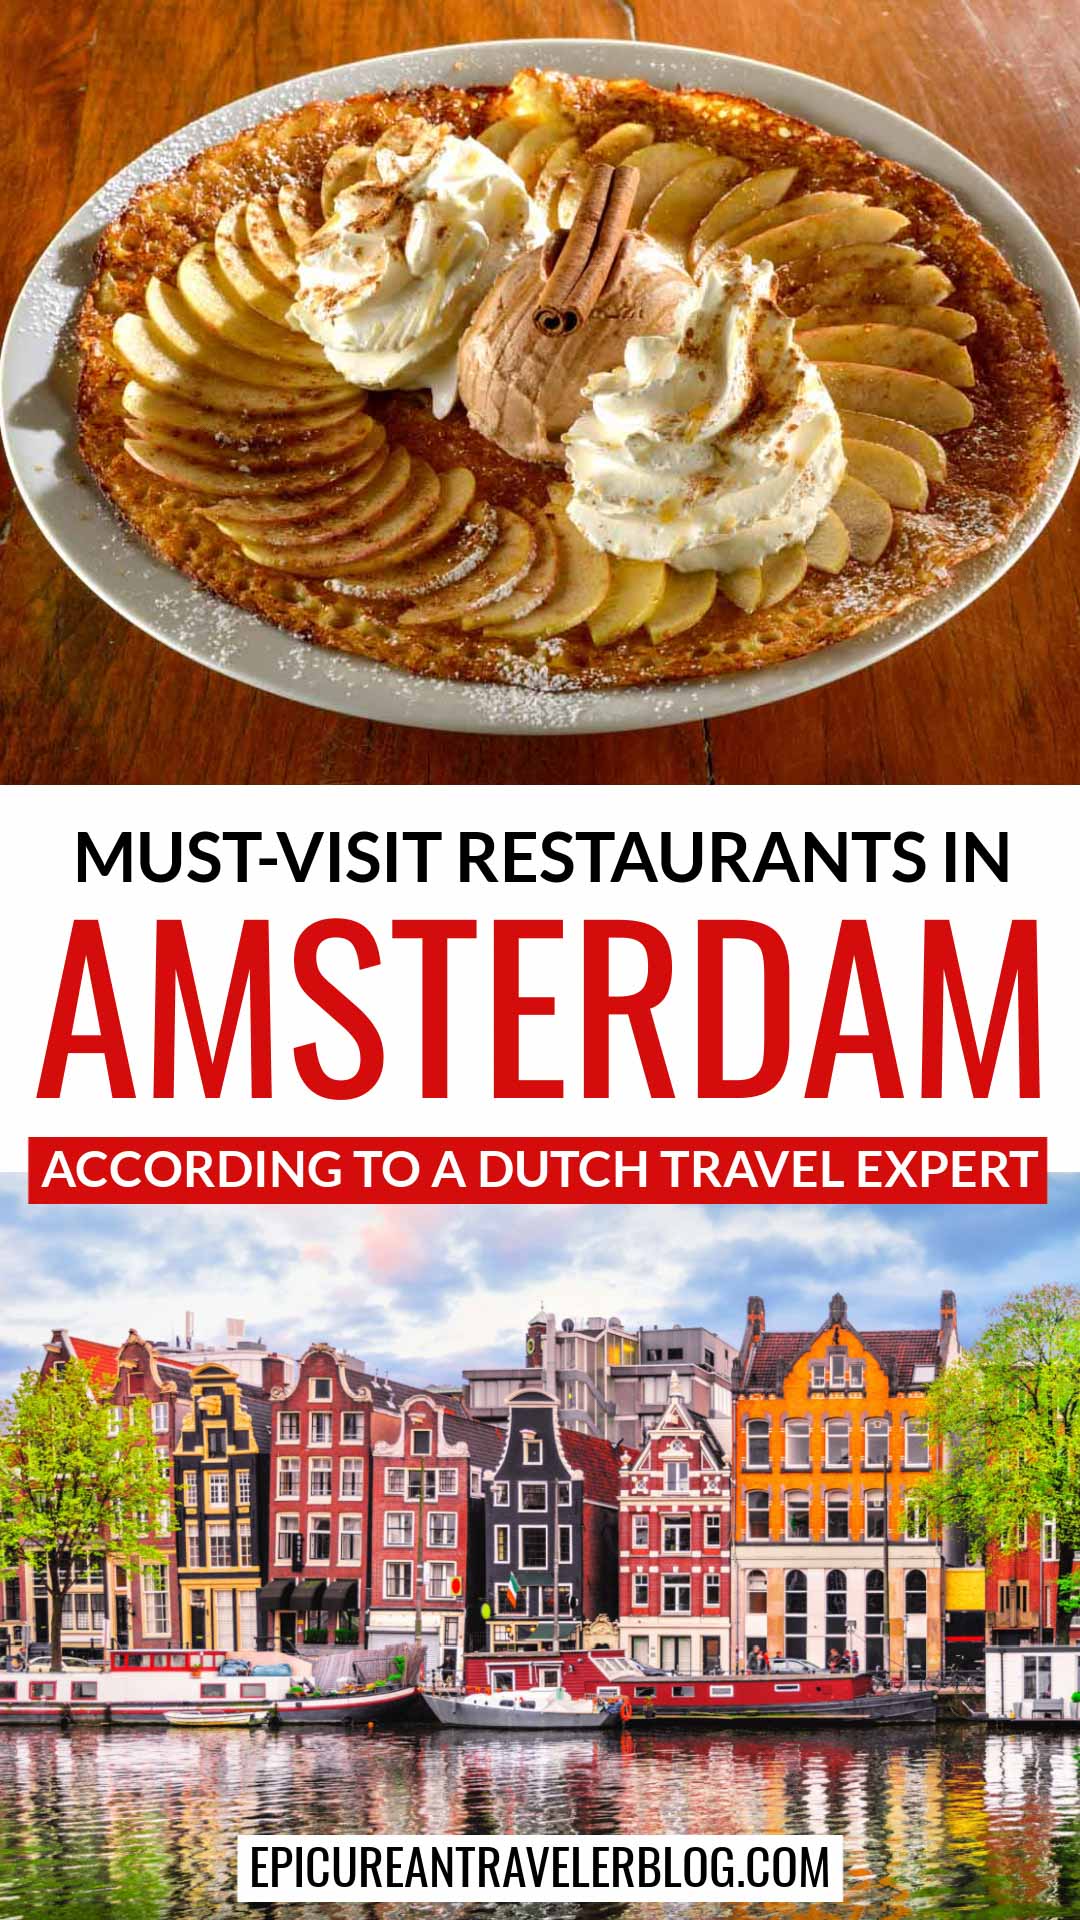 Must-visit restaurants in Amsterdam according to a Dutch travel expert